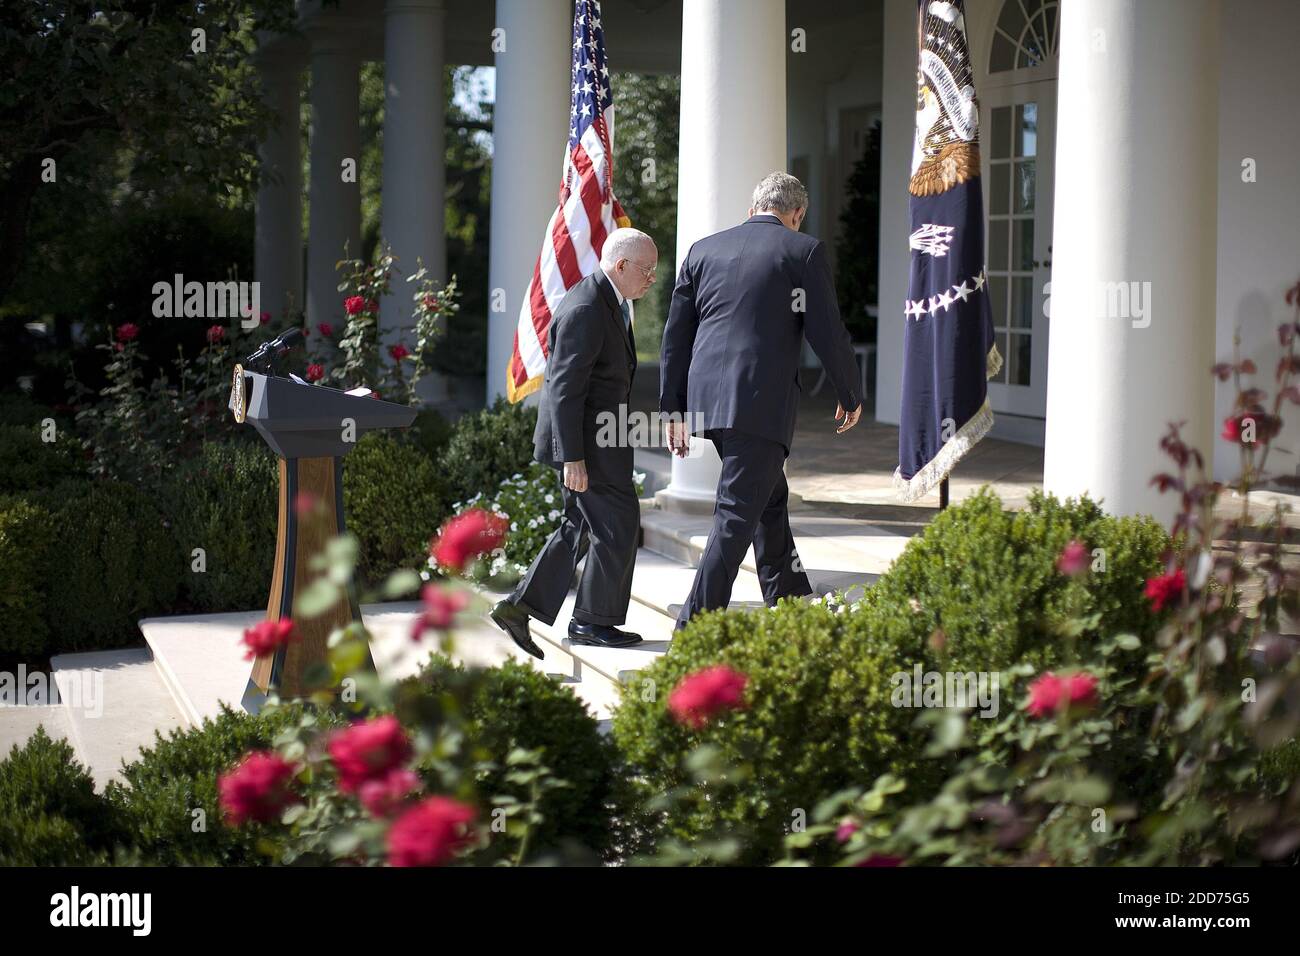 NO FILM, NO VIDEO, NO TV, NO DOCUMENTARY - President George W. Bush walks from the Rose Garden with his nominee for the new U.S. Attorney General, retired New York judge Michael Mukasey (left), in Washington, D.C., USA on September 17, 2007. Mukasey, 66, would replace Alberto Gonzales, who resigned last month after he became embroiled in controversy over the firings of nine federal prosecutors. Photo by Chuck Kennedy/MCT/ABACAPRESS.COM Stock Photo